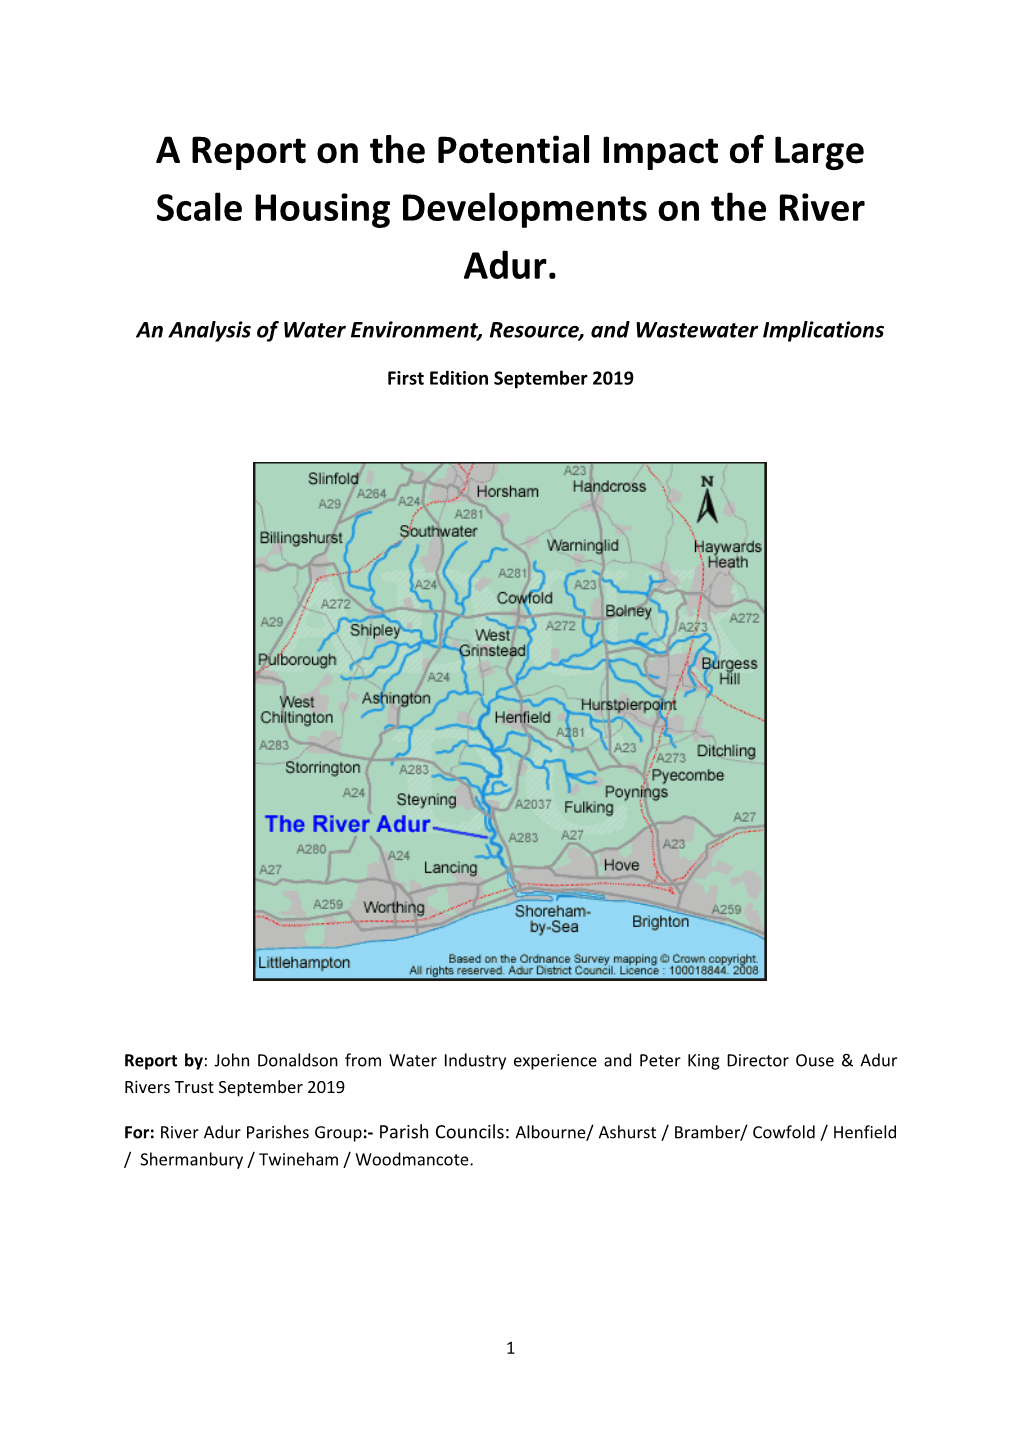 A Report on the Potential Impact of Large Scale Housing Developments on the River Adur